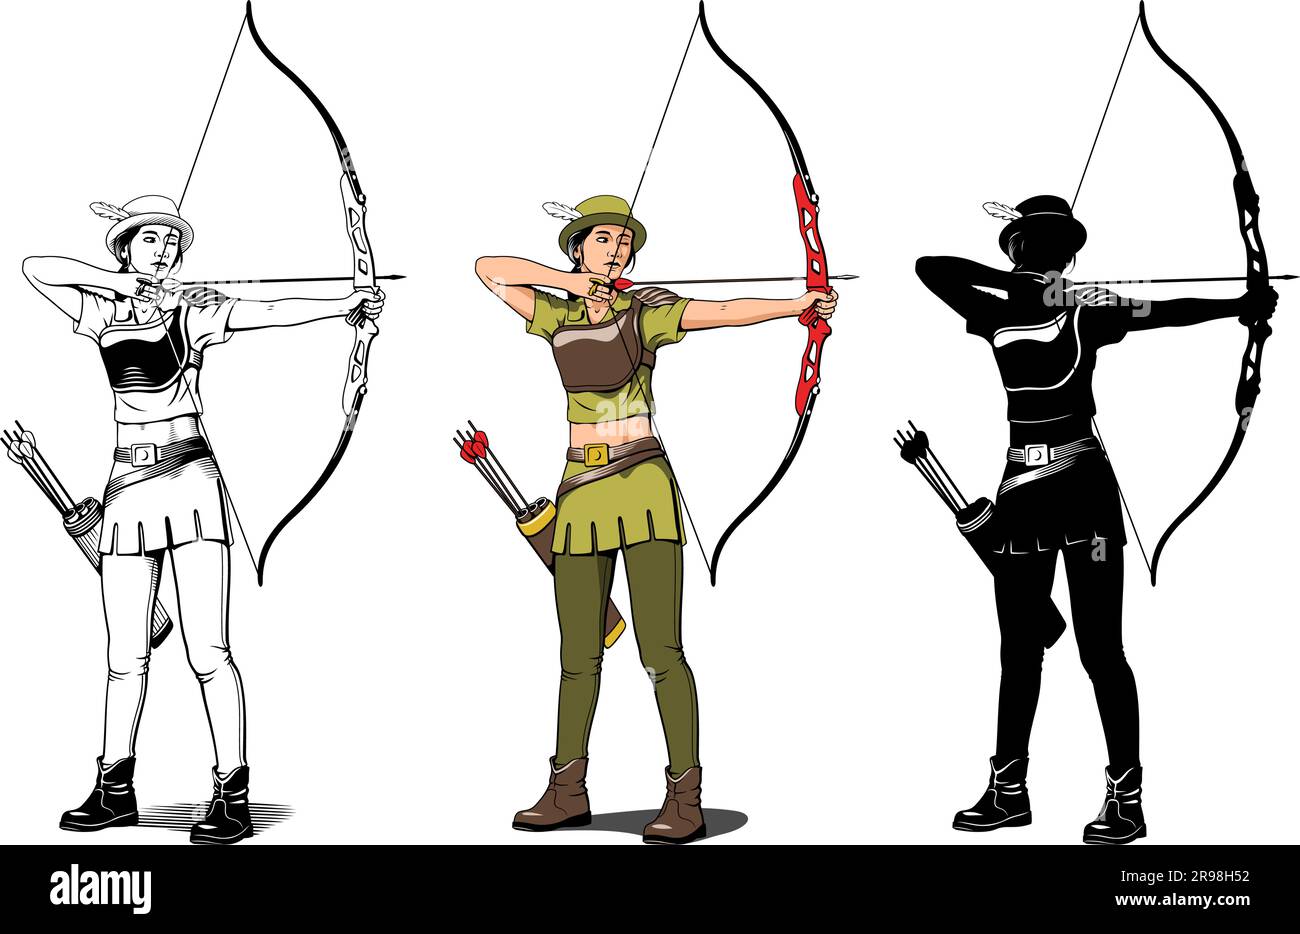 What is life? — isei-silva: I'm really into archery poses lately...